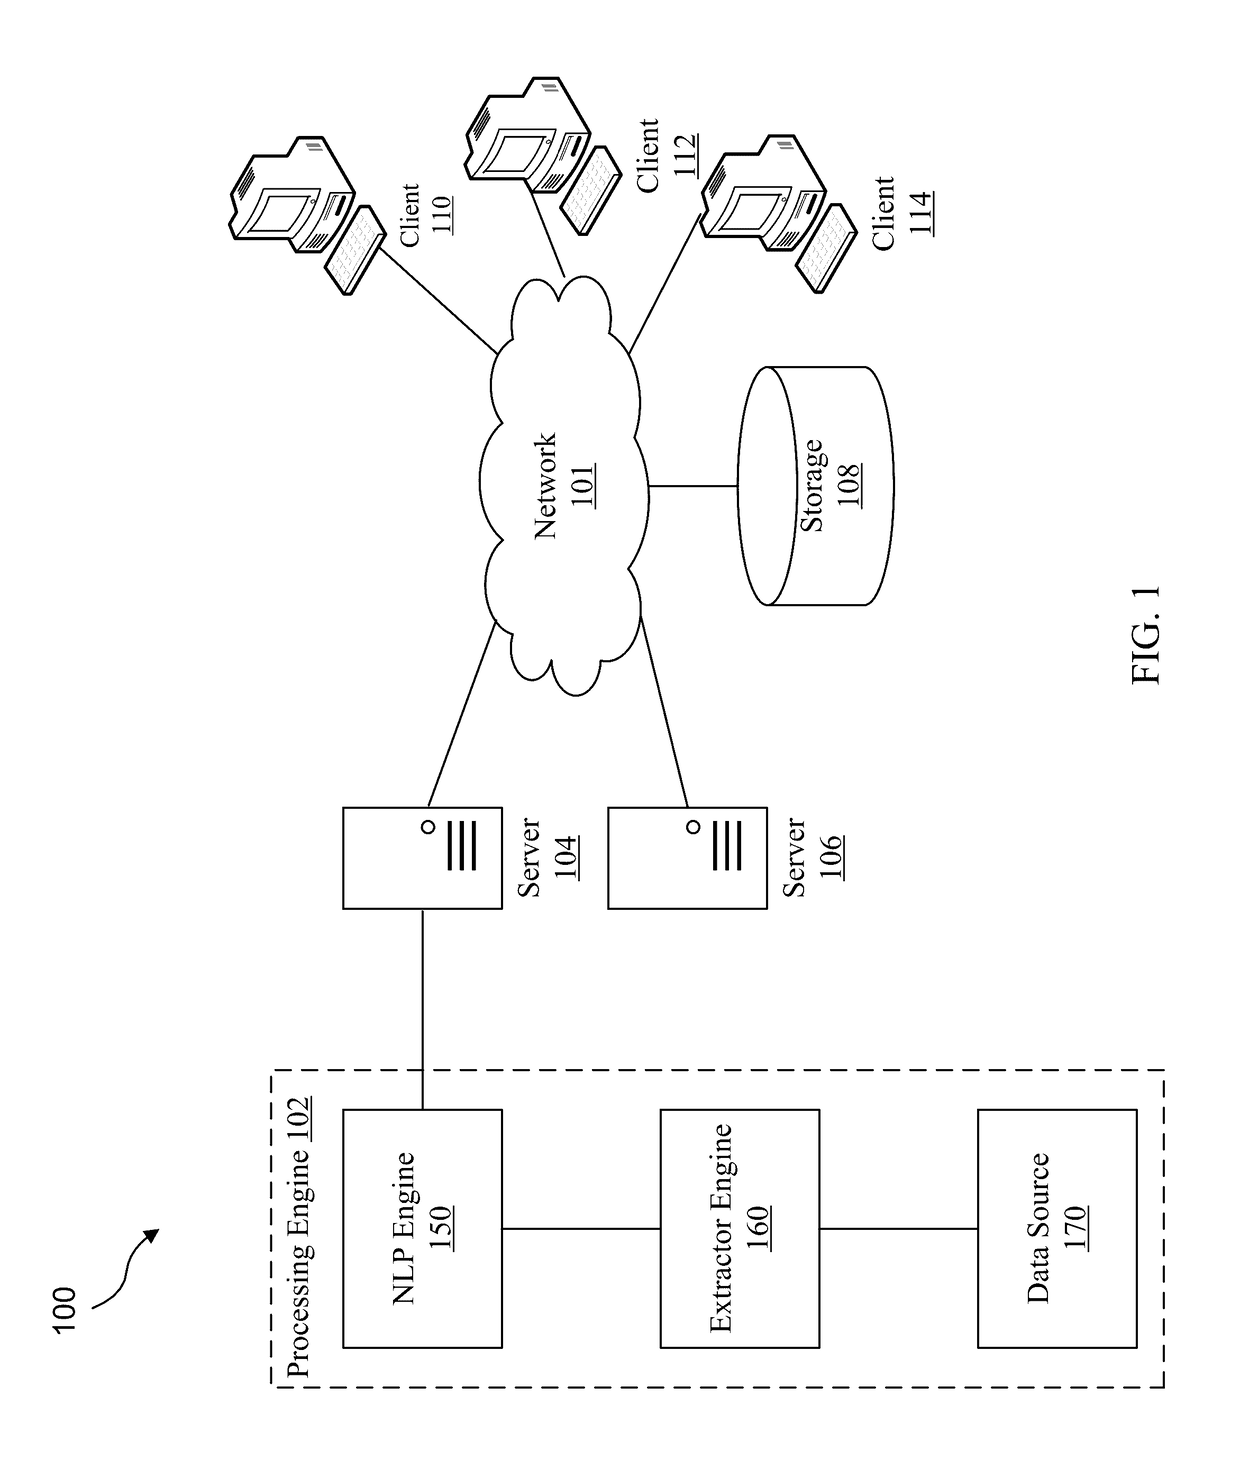 System and method of extracting linked node graph data structures from unstructured content